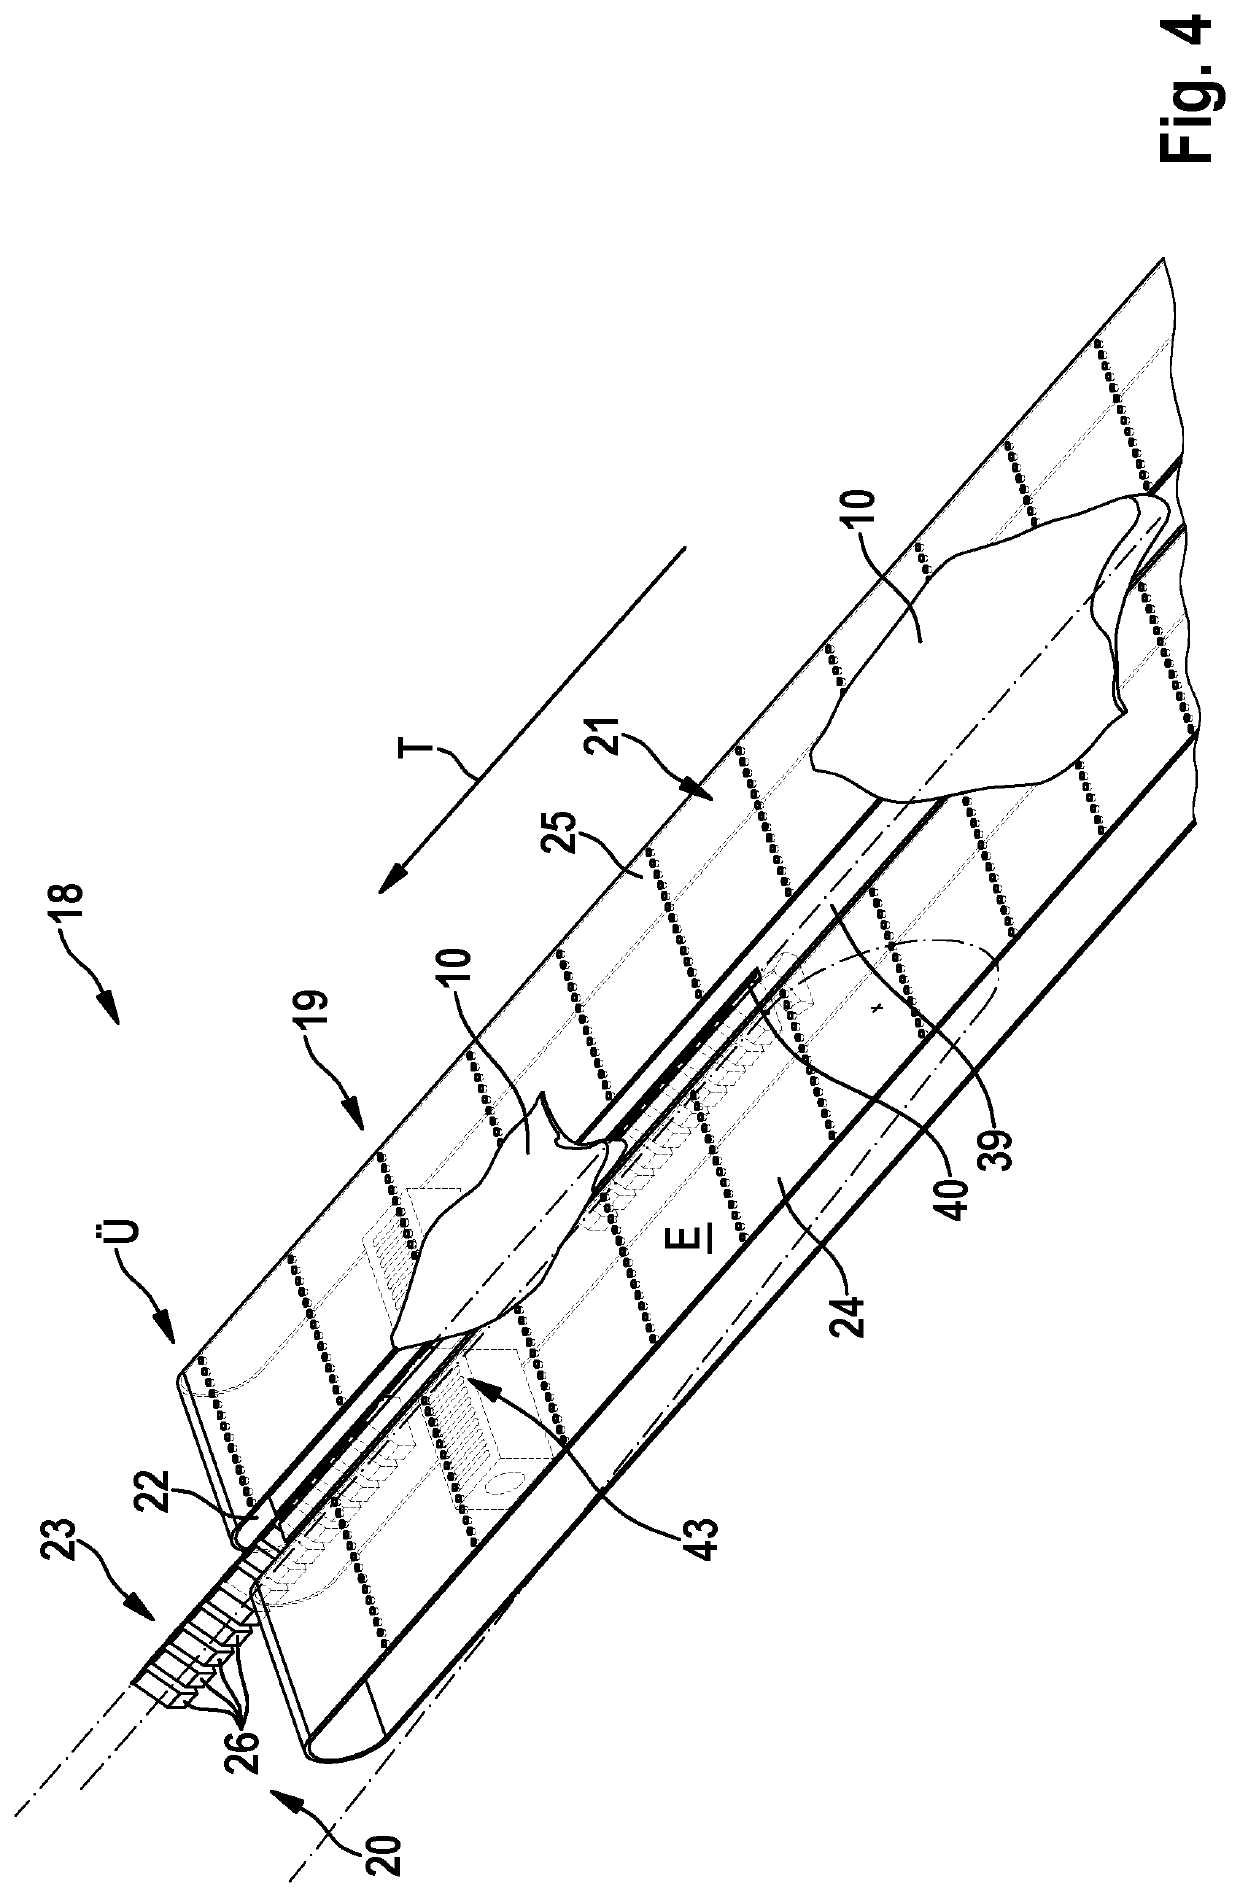 Conveying unit designed and configured for automatically conveying fillet-like meat products, in particular fish fillets, and method relating to same